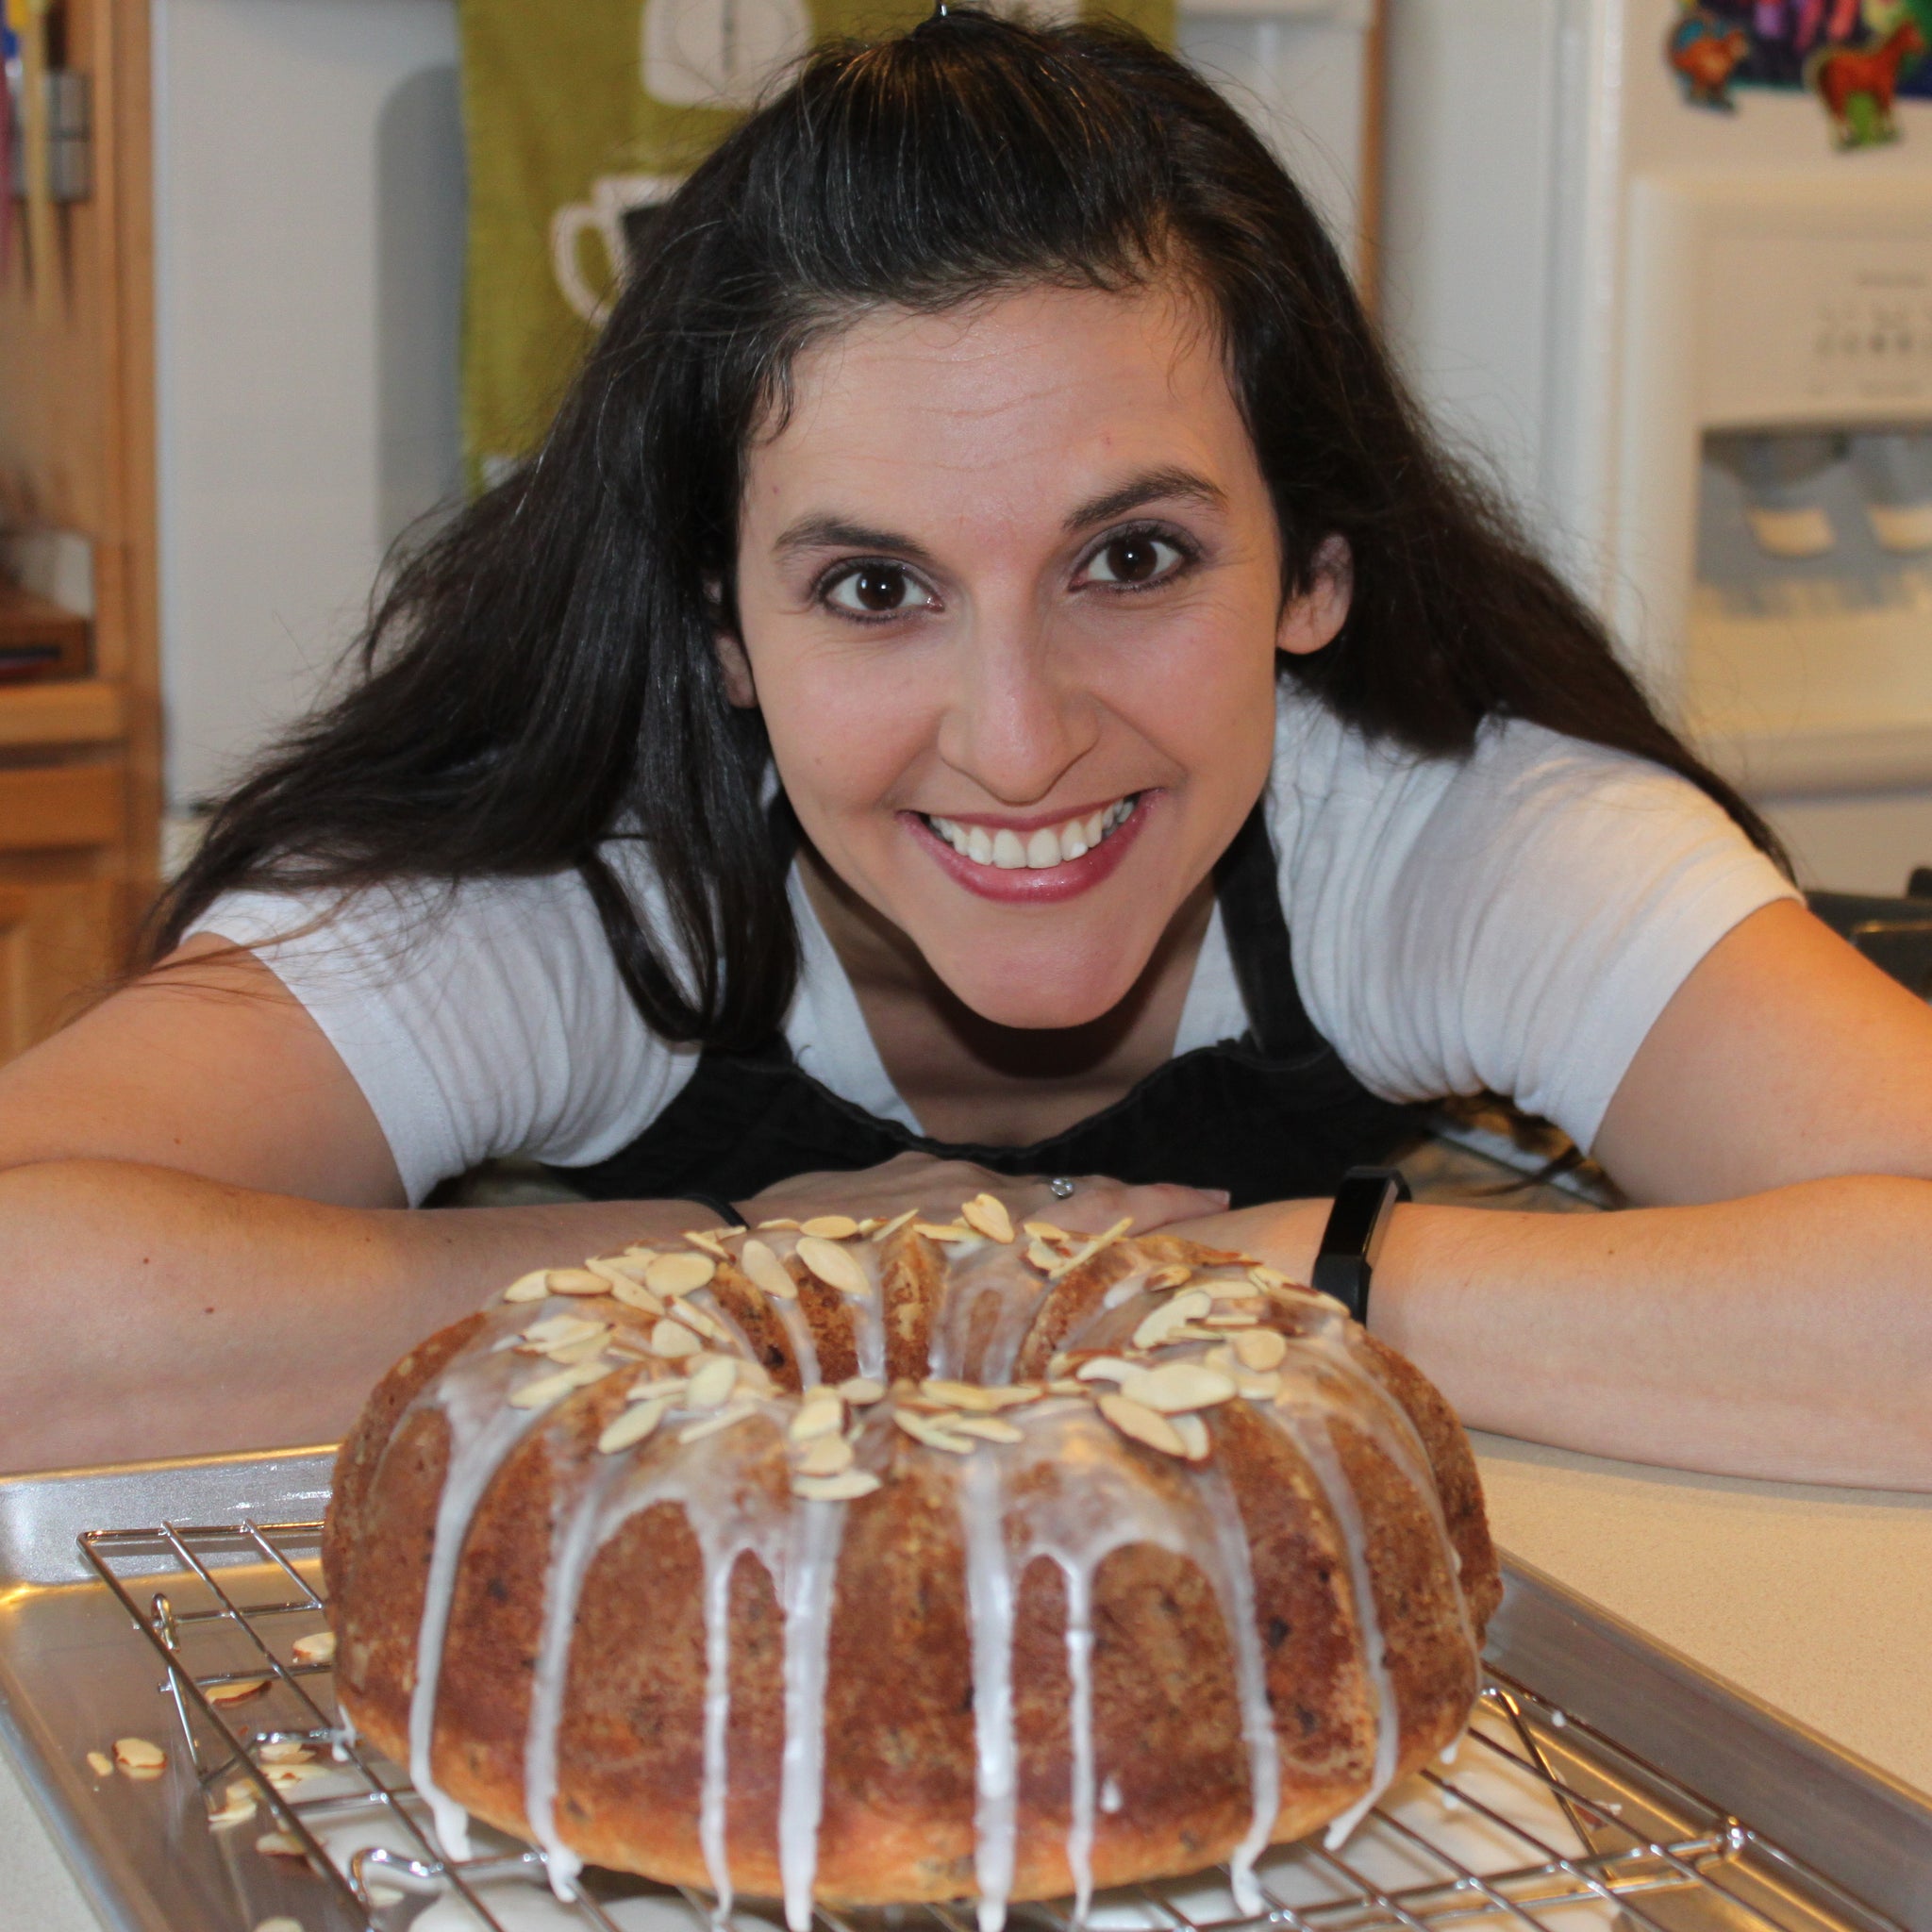 Online Baking Class Inspired by GBBO